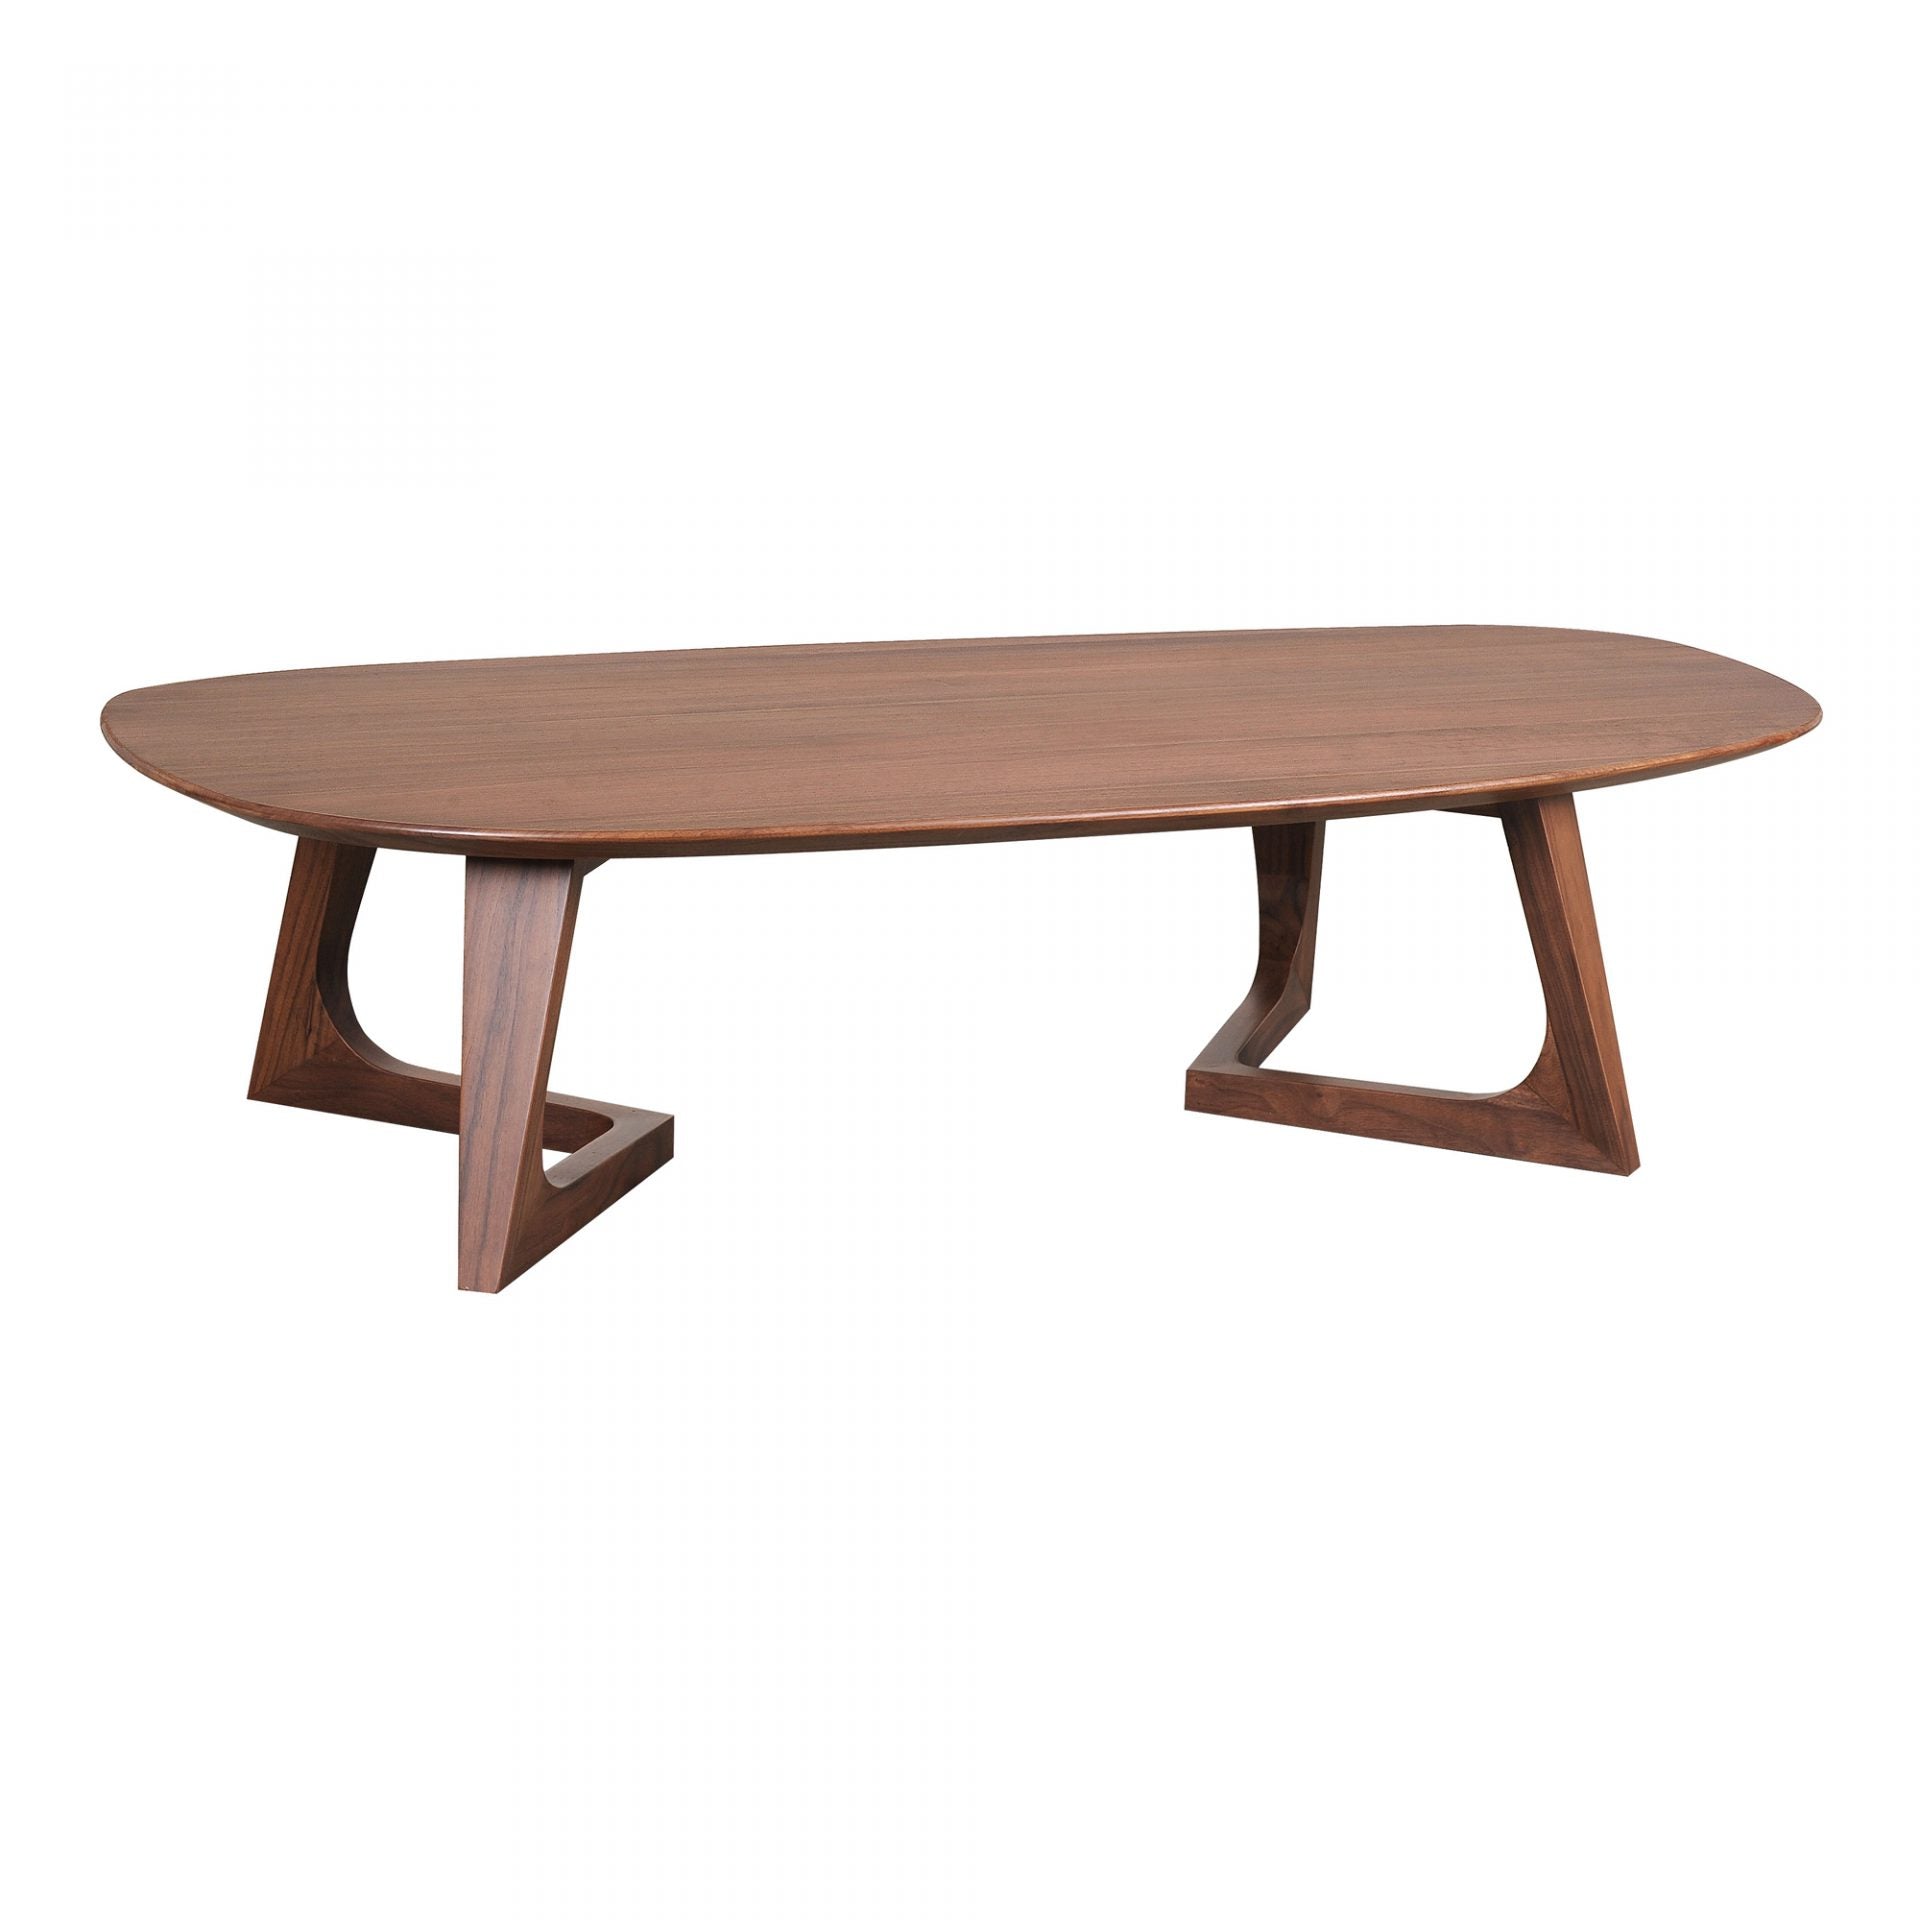 With a solid walnut finish and unique shape, this Godenza Coffee Table is a contemporary take on a mid-century modern classic. Made from solid, high-quality American walnut, this coffee table's warm hues brighten up your space while offering a medium-sized tabletop for your everyday needs.  Size: 42"W x 27.5"D x 15"H